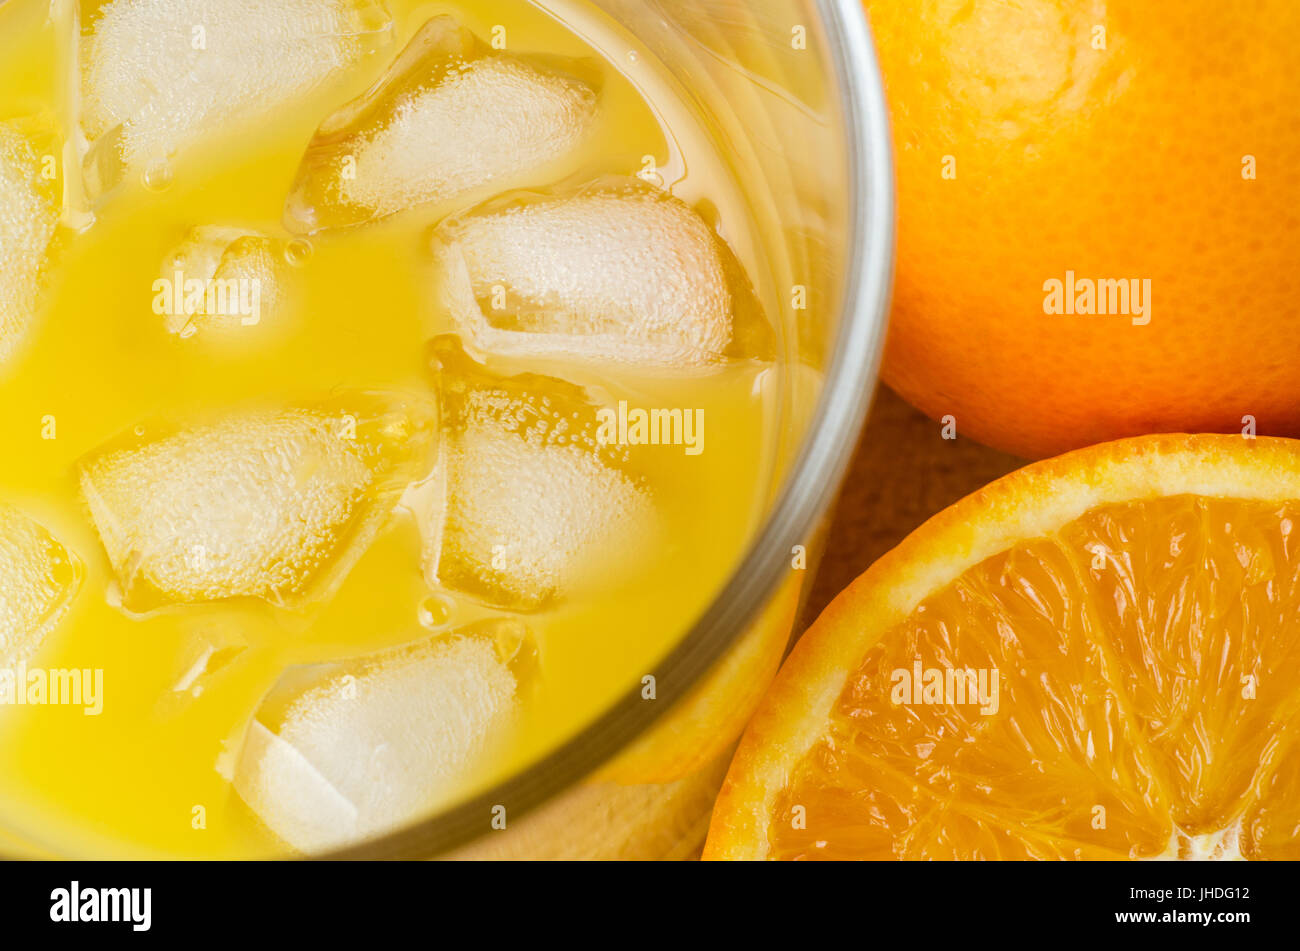 Angled overhead close up shot of fresh juice in glass with ice cubes, beside whole and half oranges on wooden table. Stock Photo